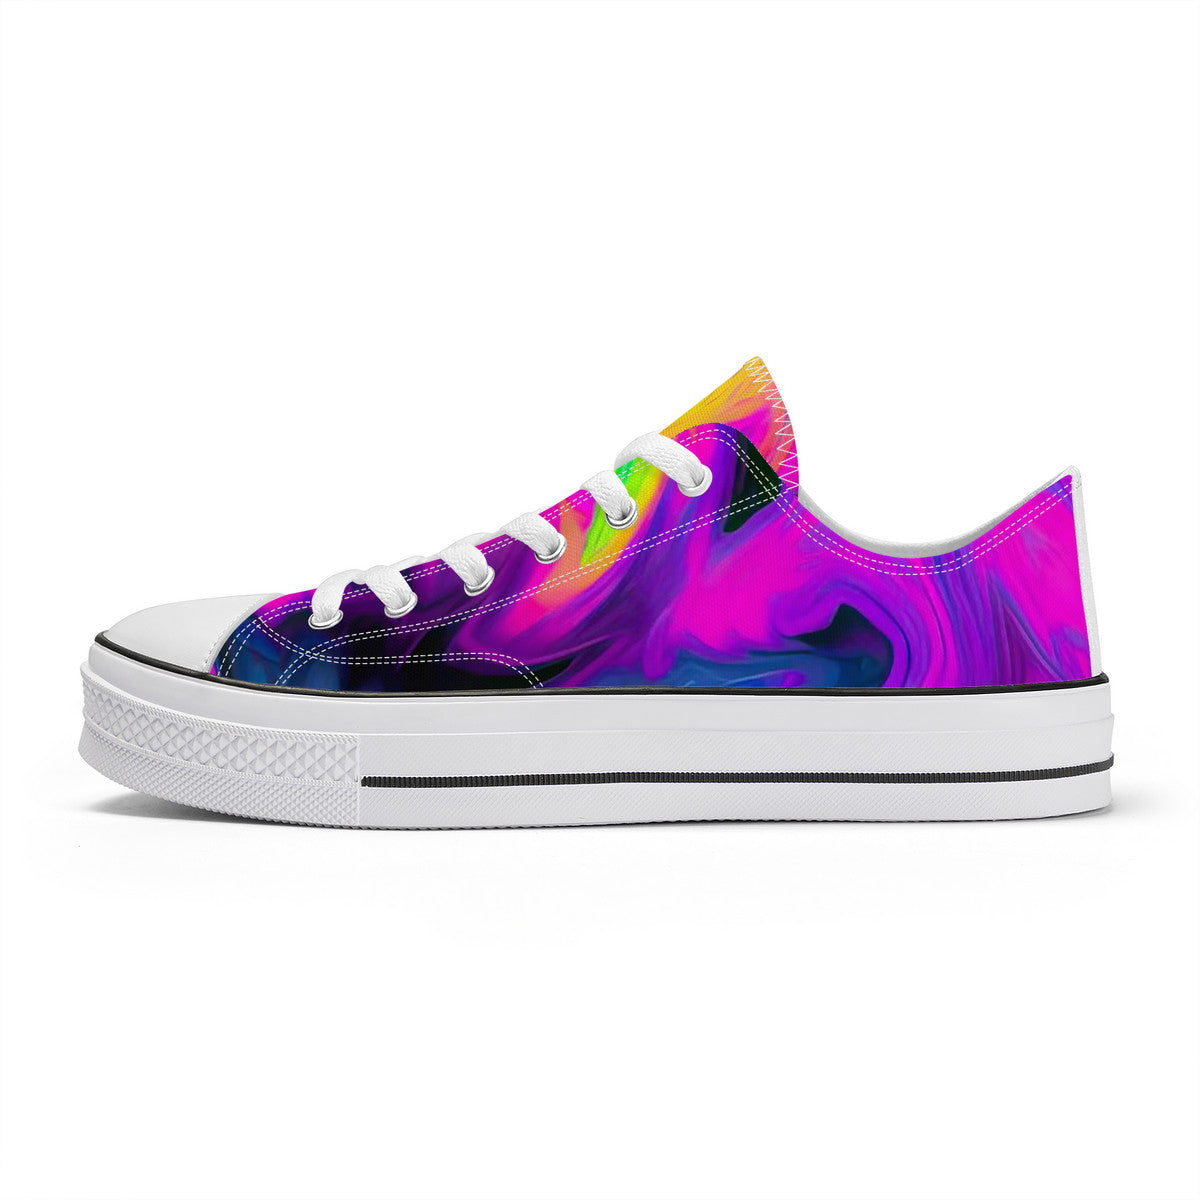 Personalize This Neon Tie Dye Unisex Low Top Canvas Shoes - White